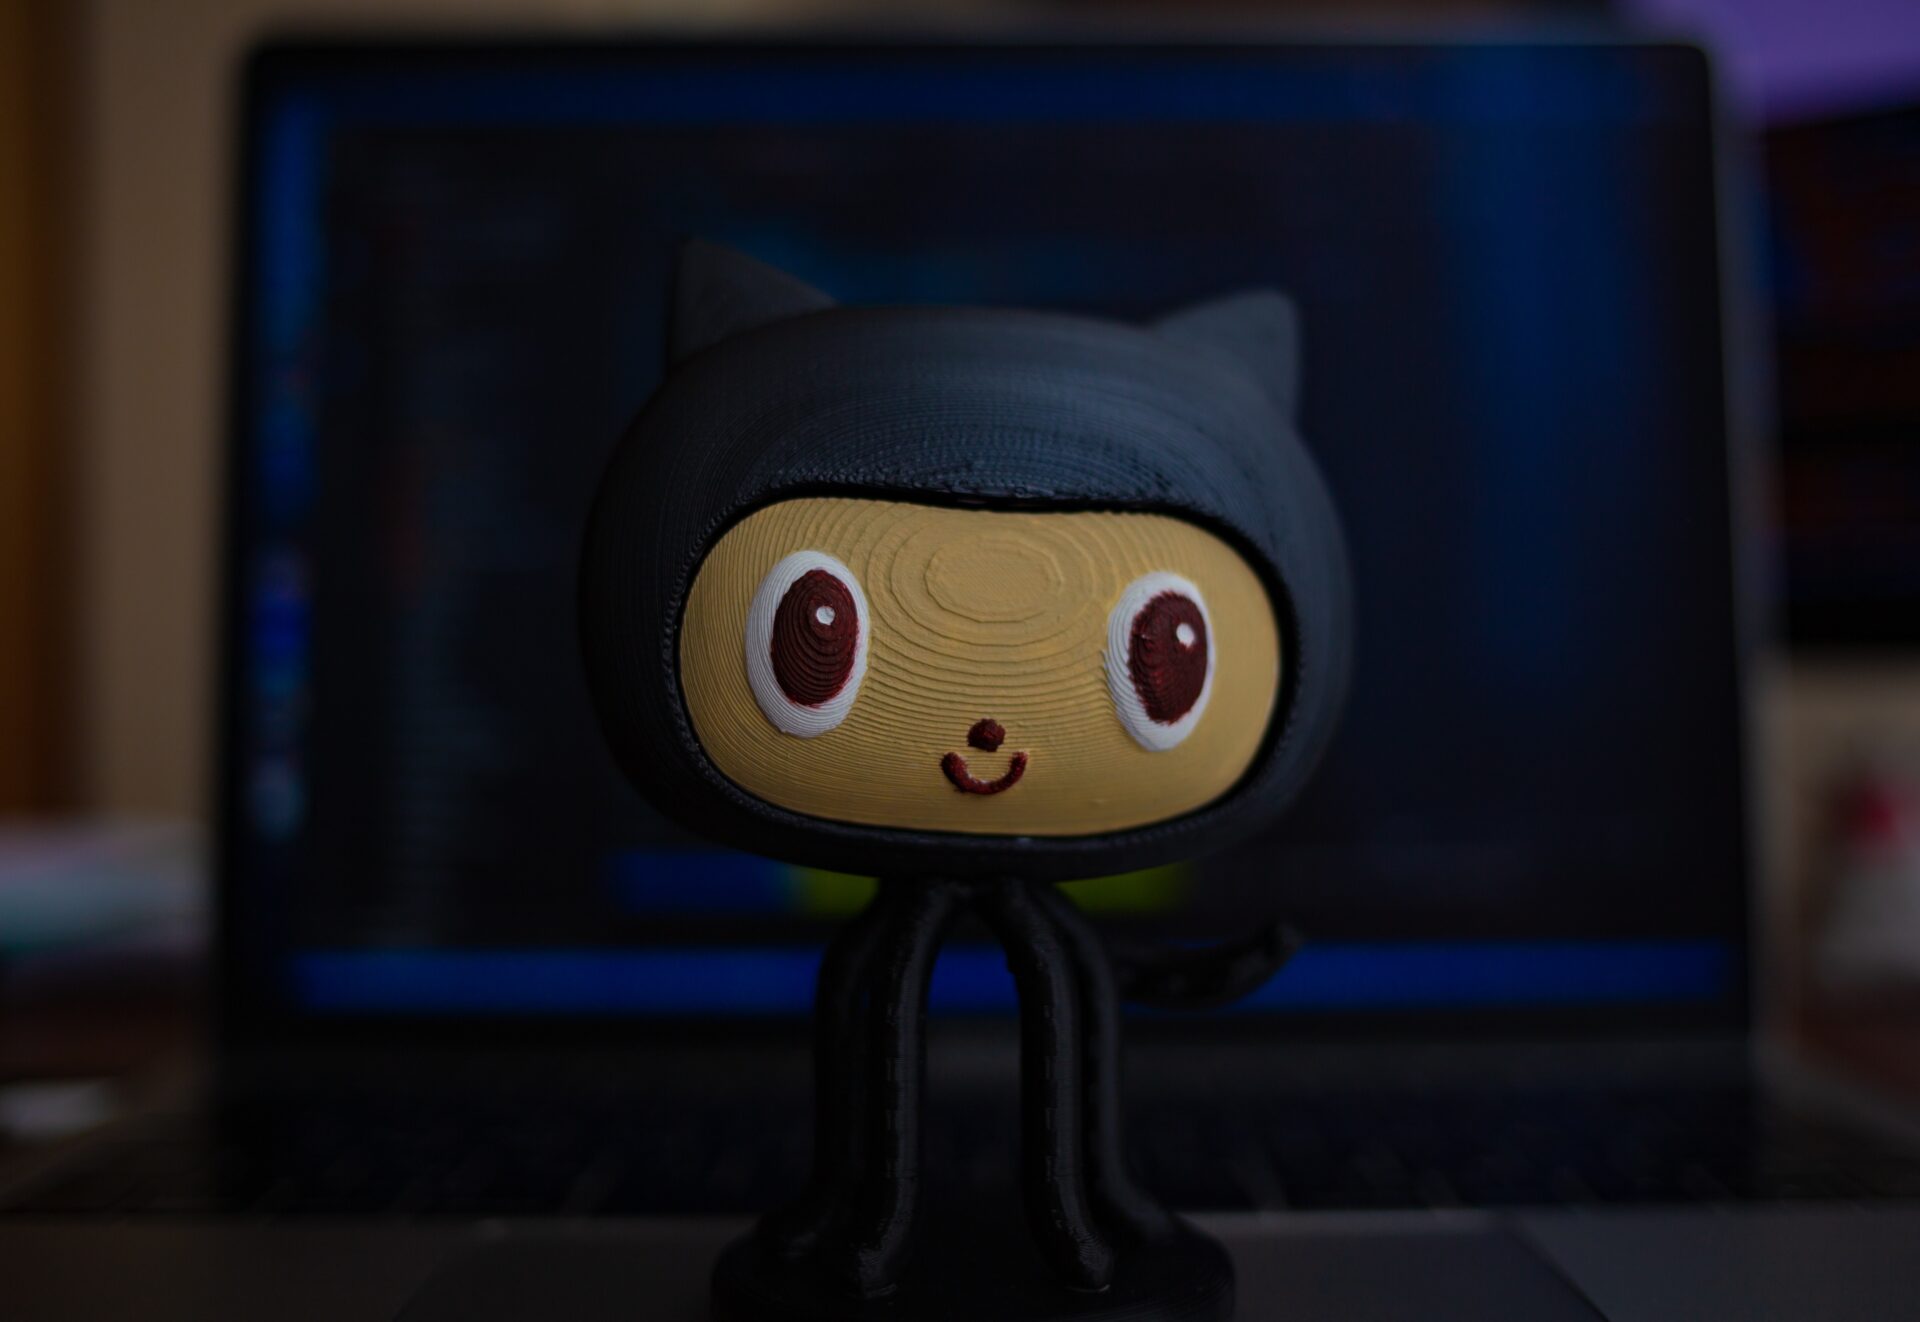 A small figurine of an oktokata in the center, in the background a laptop with an open code editor and a terminal.